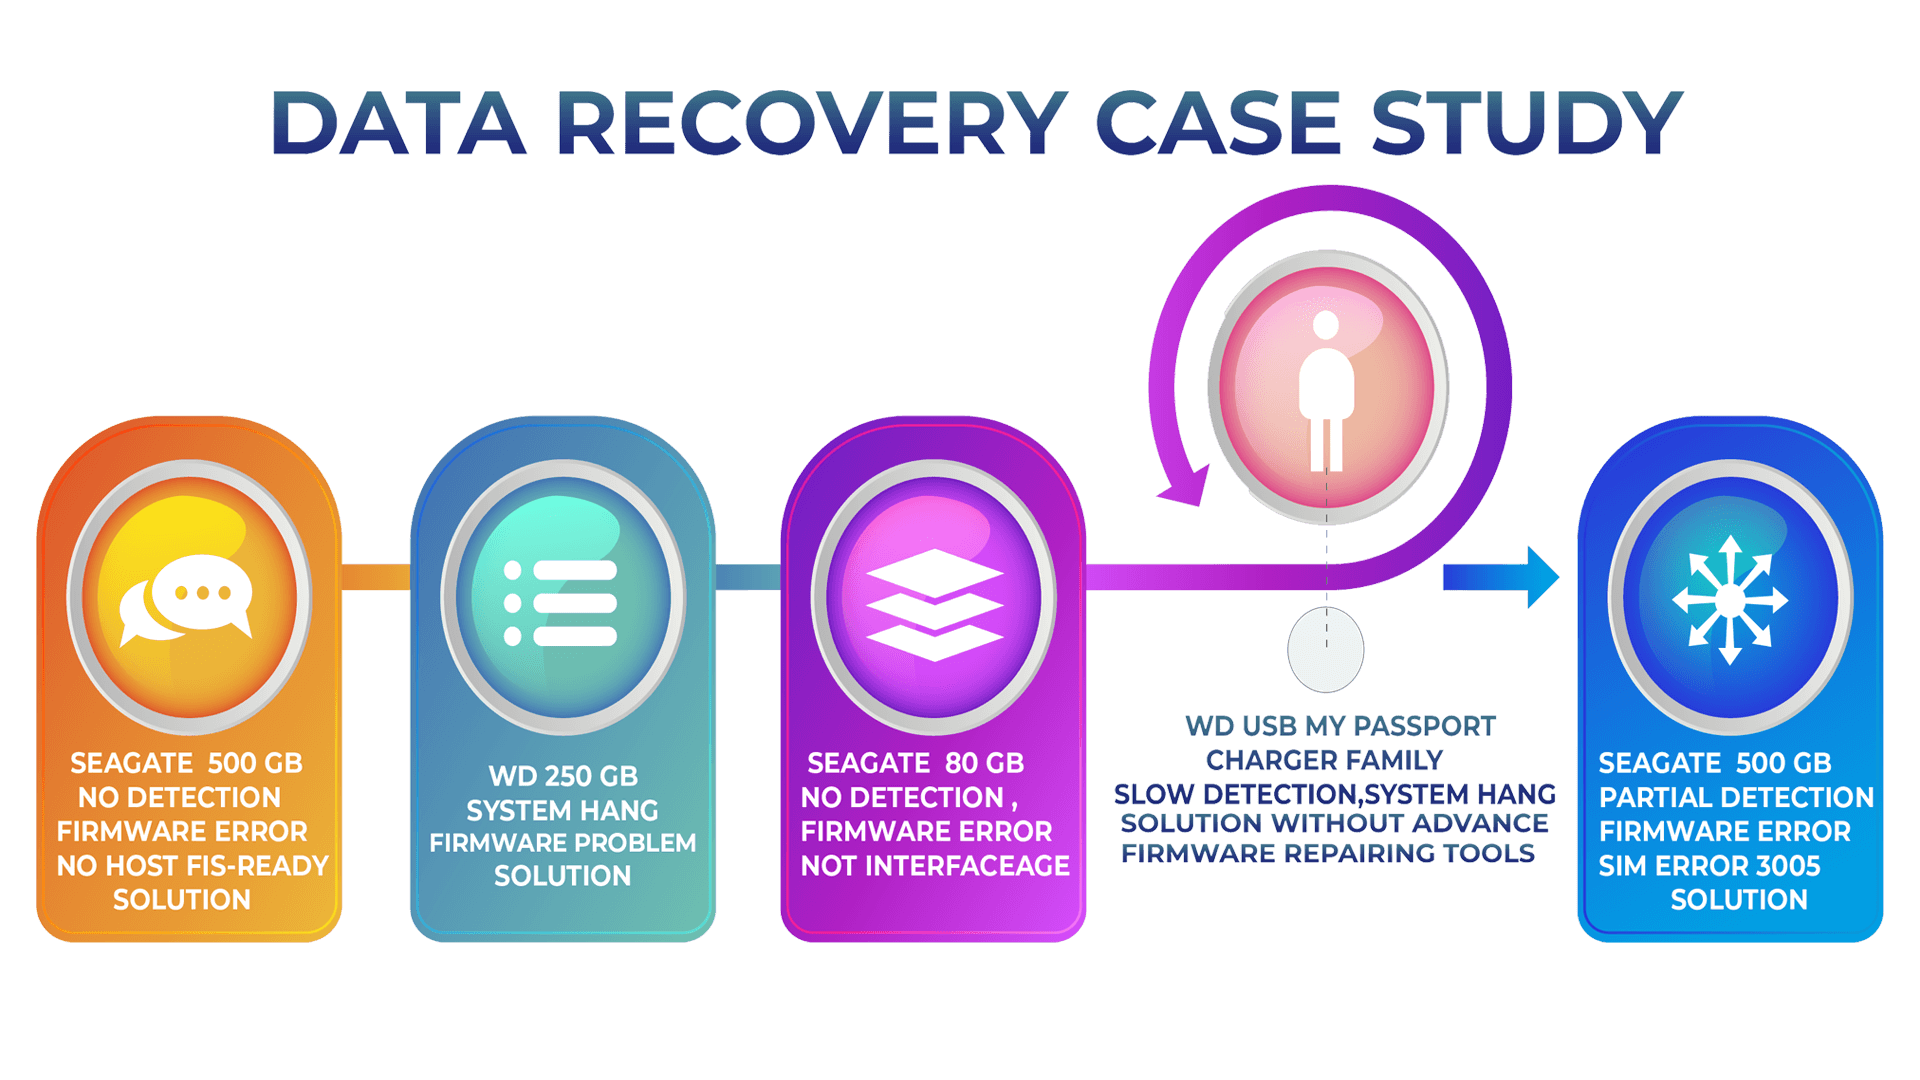 DATA RECOVERY CASE STUDY